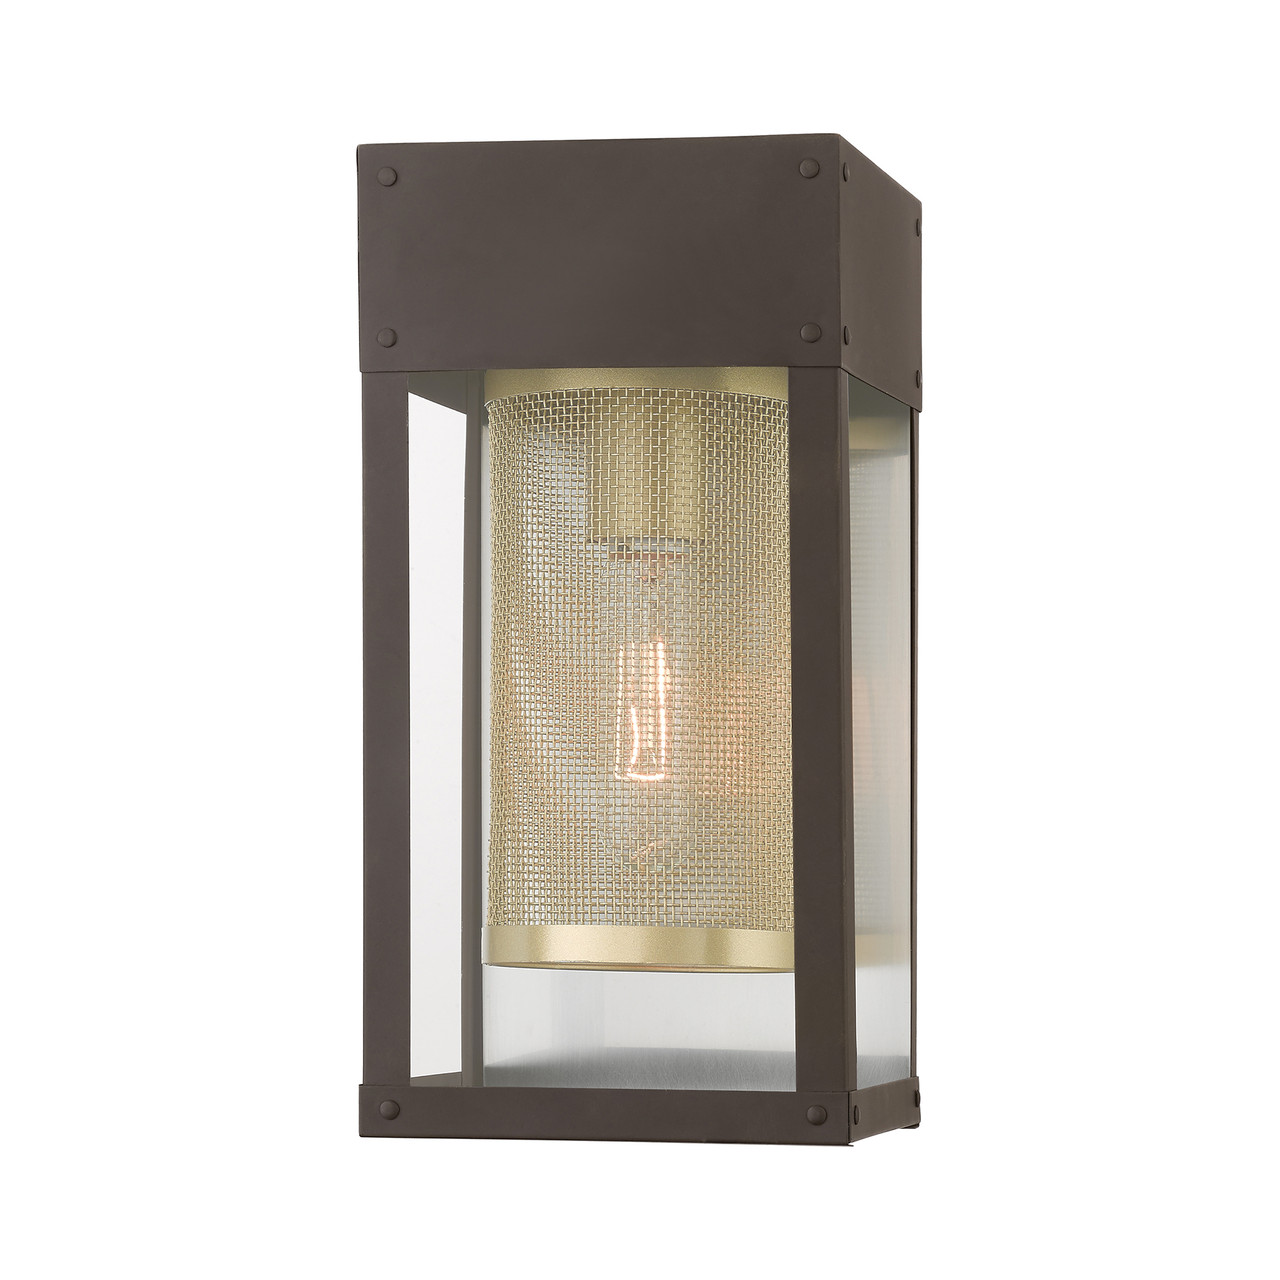 LIVEX LIGHTING 20761-07 1 Light Bronze with Soft Gold Candle and Brushed Nickel Stainless Steel Reflector Outdoor Wall Lantern